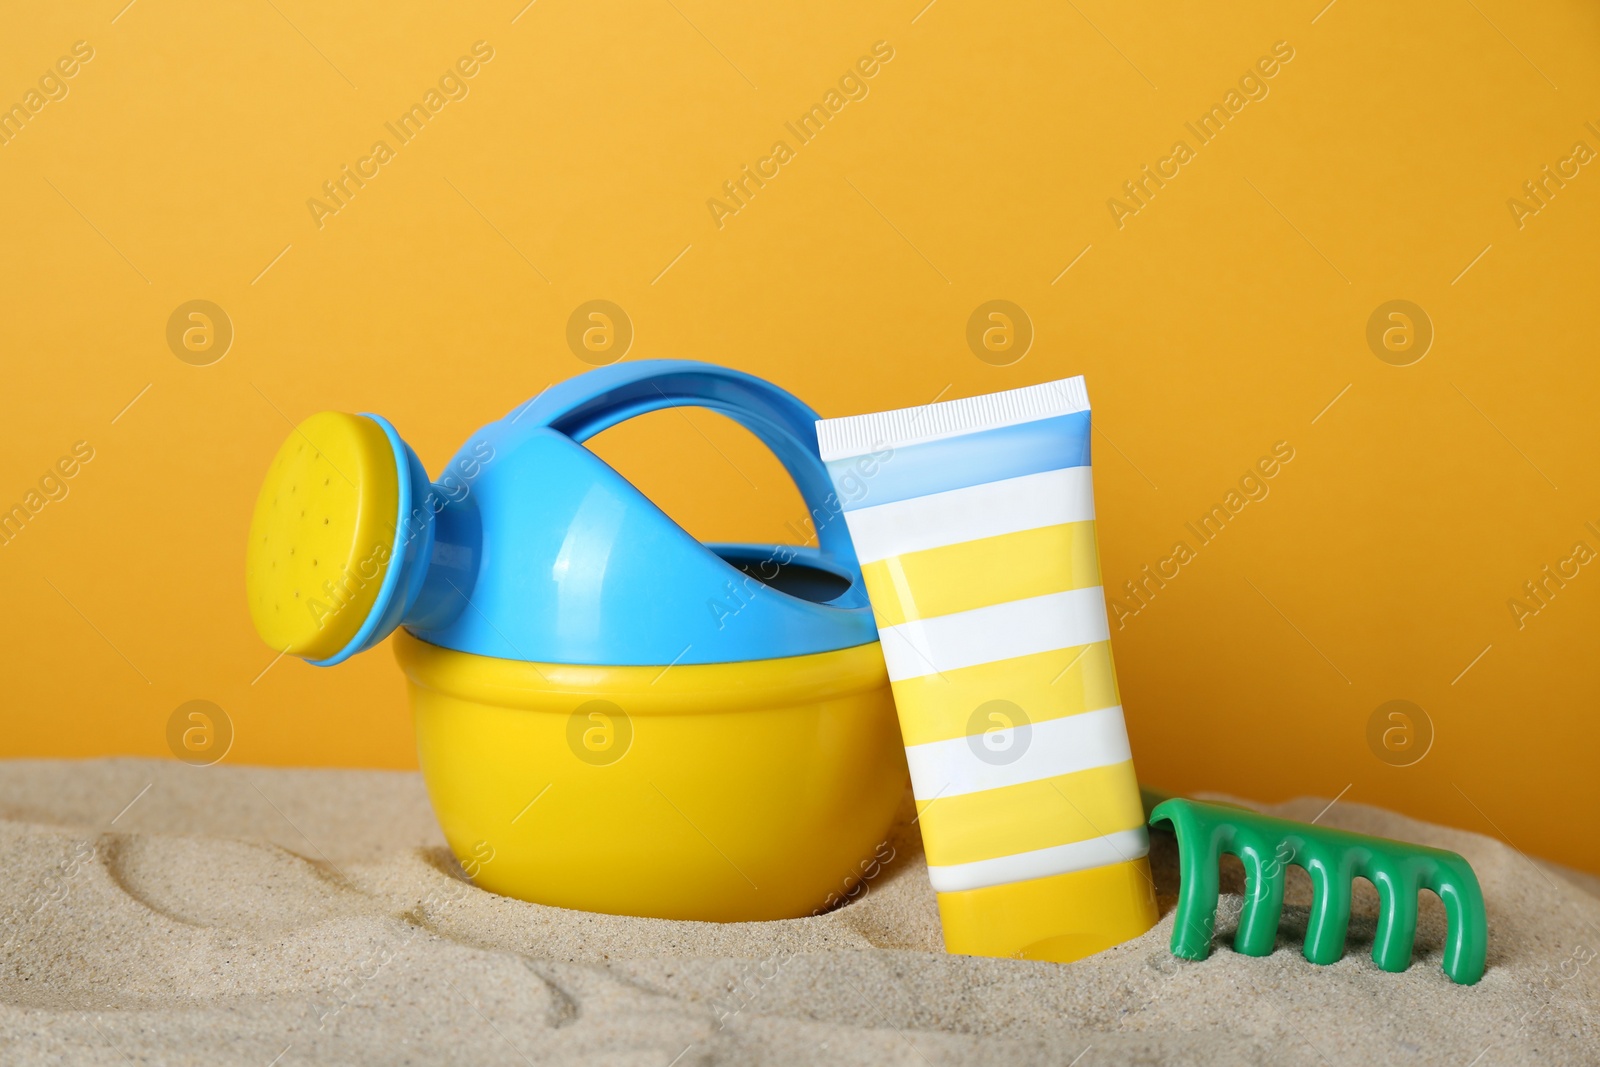 Photo of Suntan product and plastic beach toys on sand against yellow background